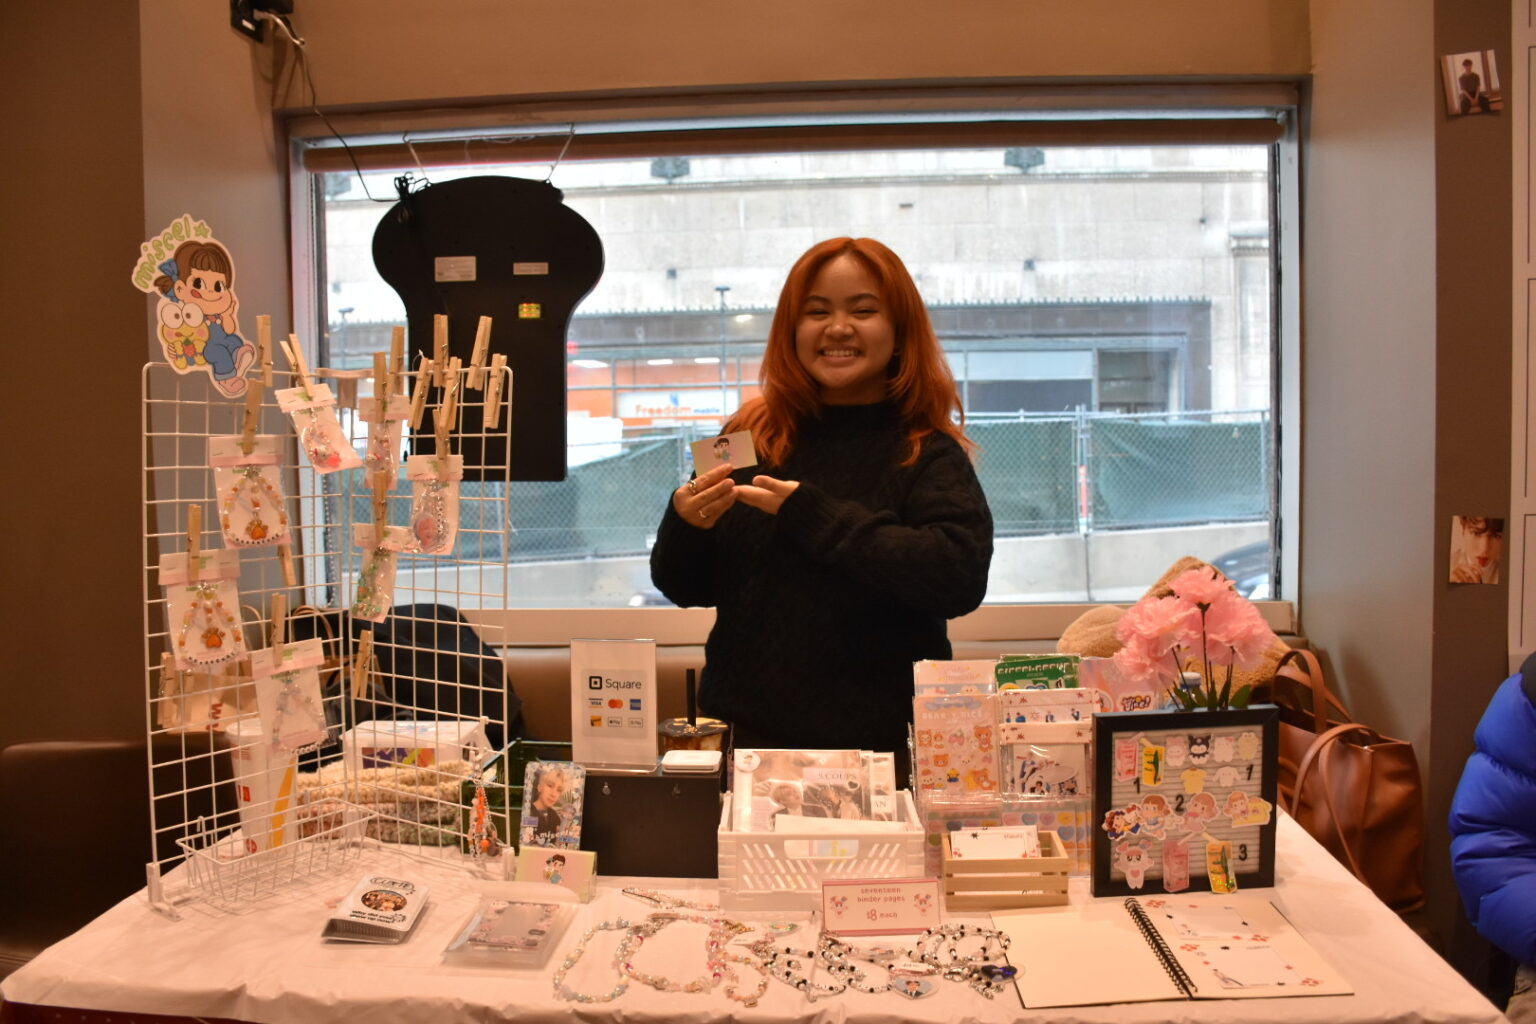 Girl with red hair poses in front of K-pop-themed stationary products and handmade keychains at a local bubble tea shop